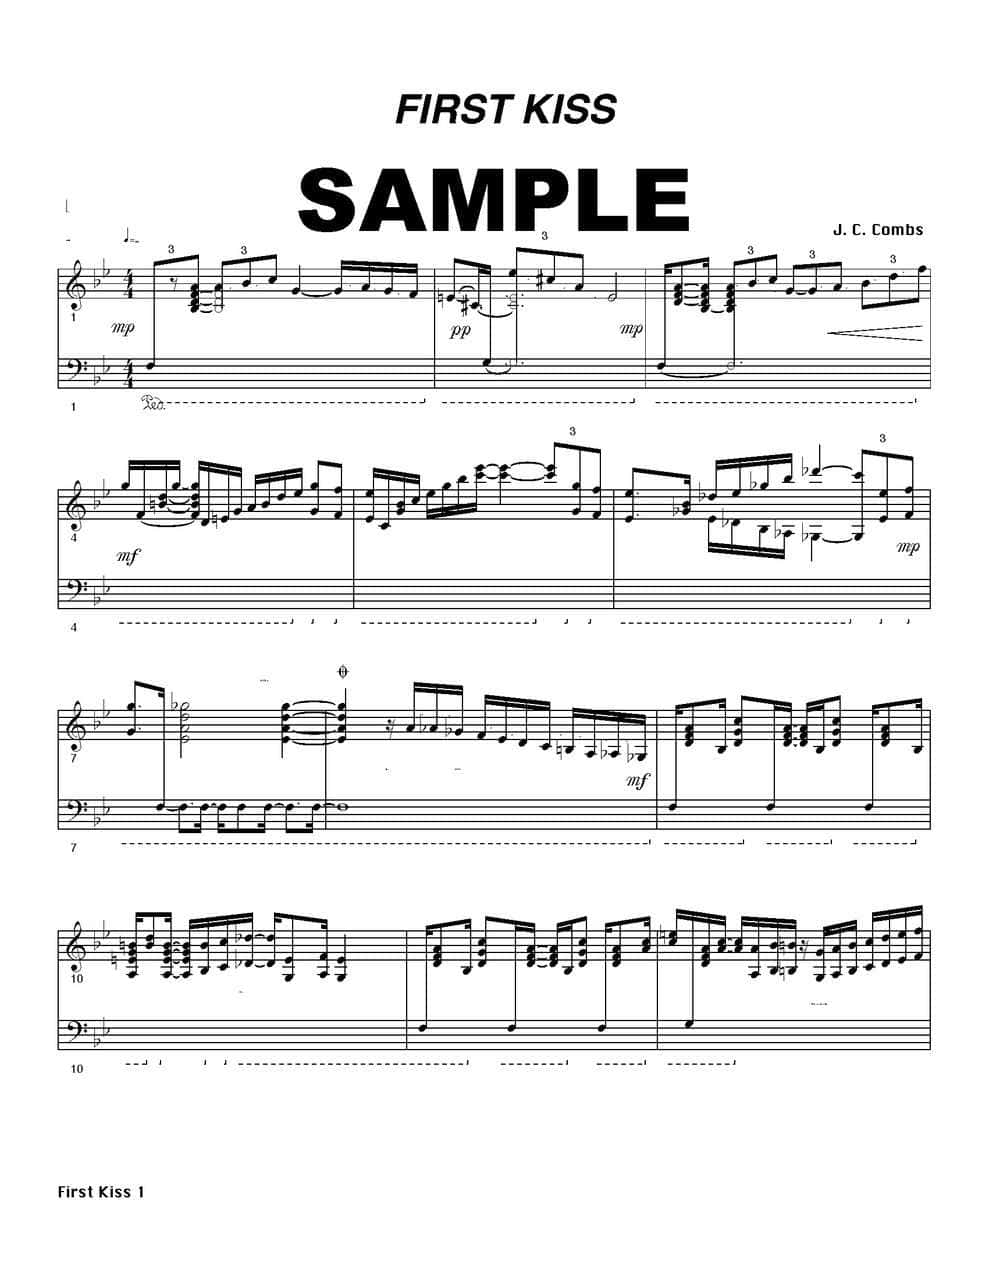 Three Pieces for Vibraphone by J C Combs